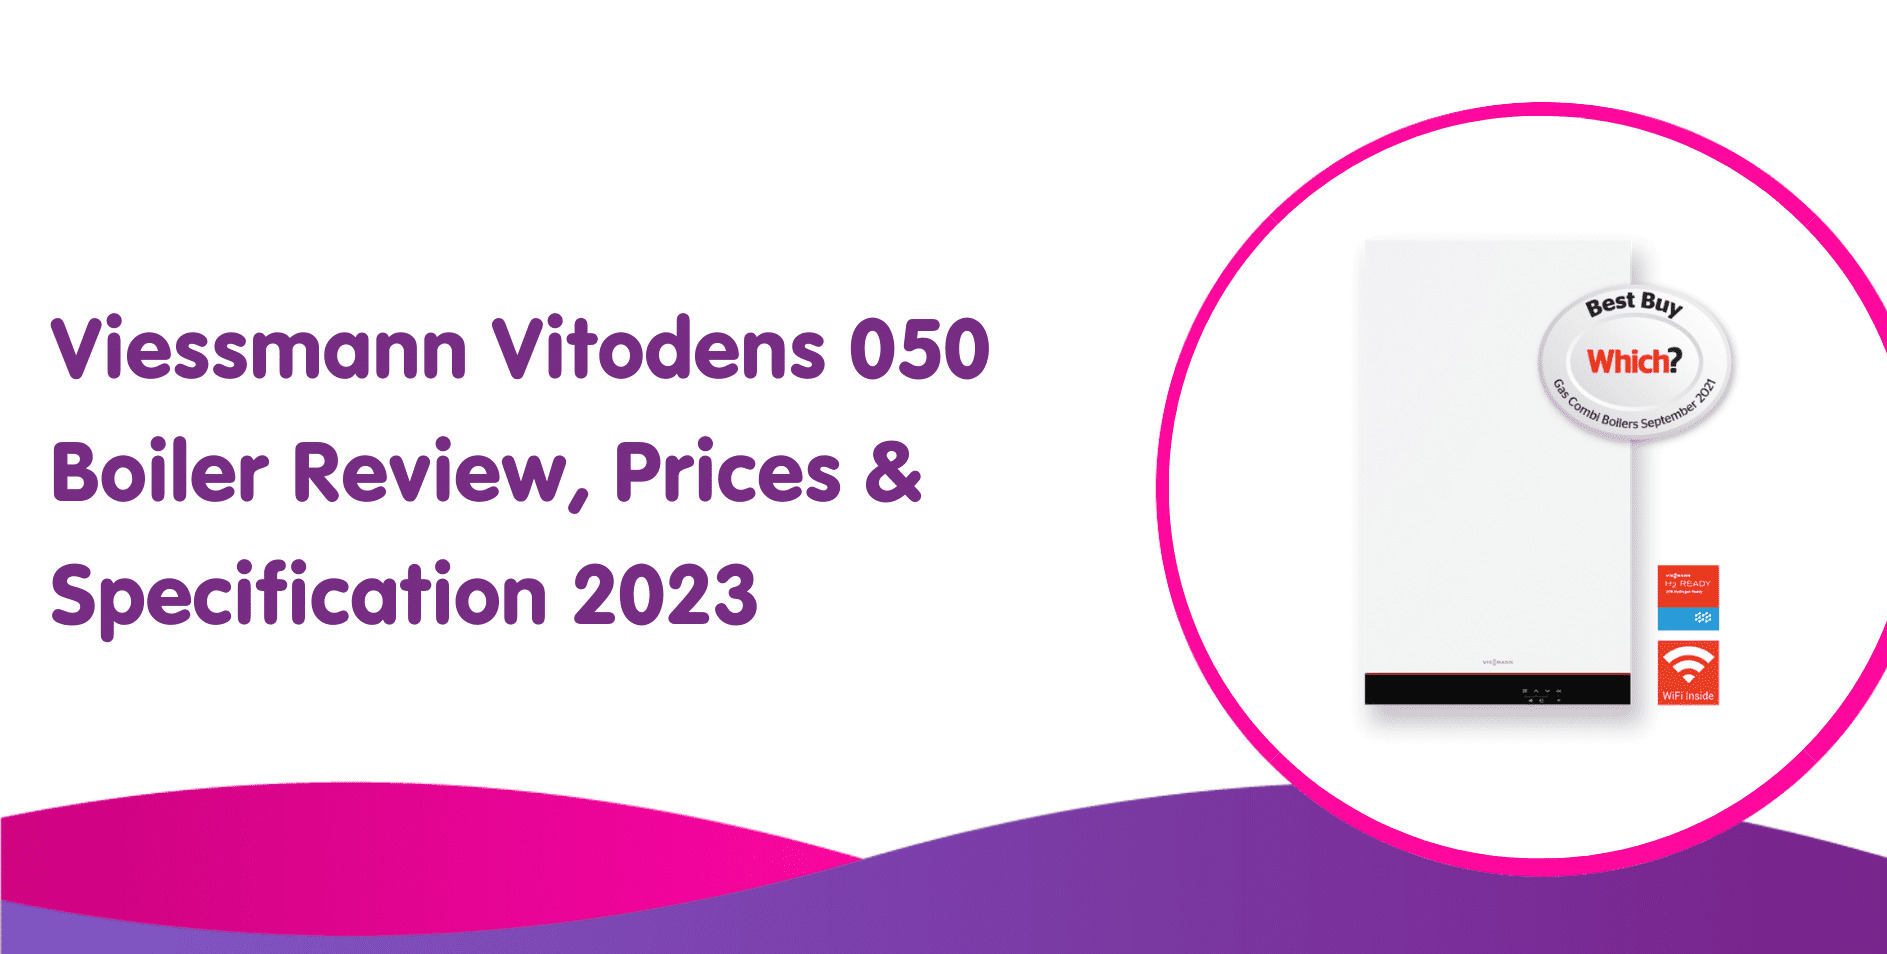 Viessmann Vitodens 050 Boiler Review, Prices & Specification 2023